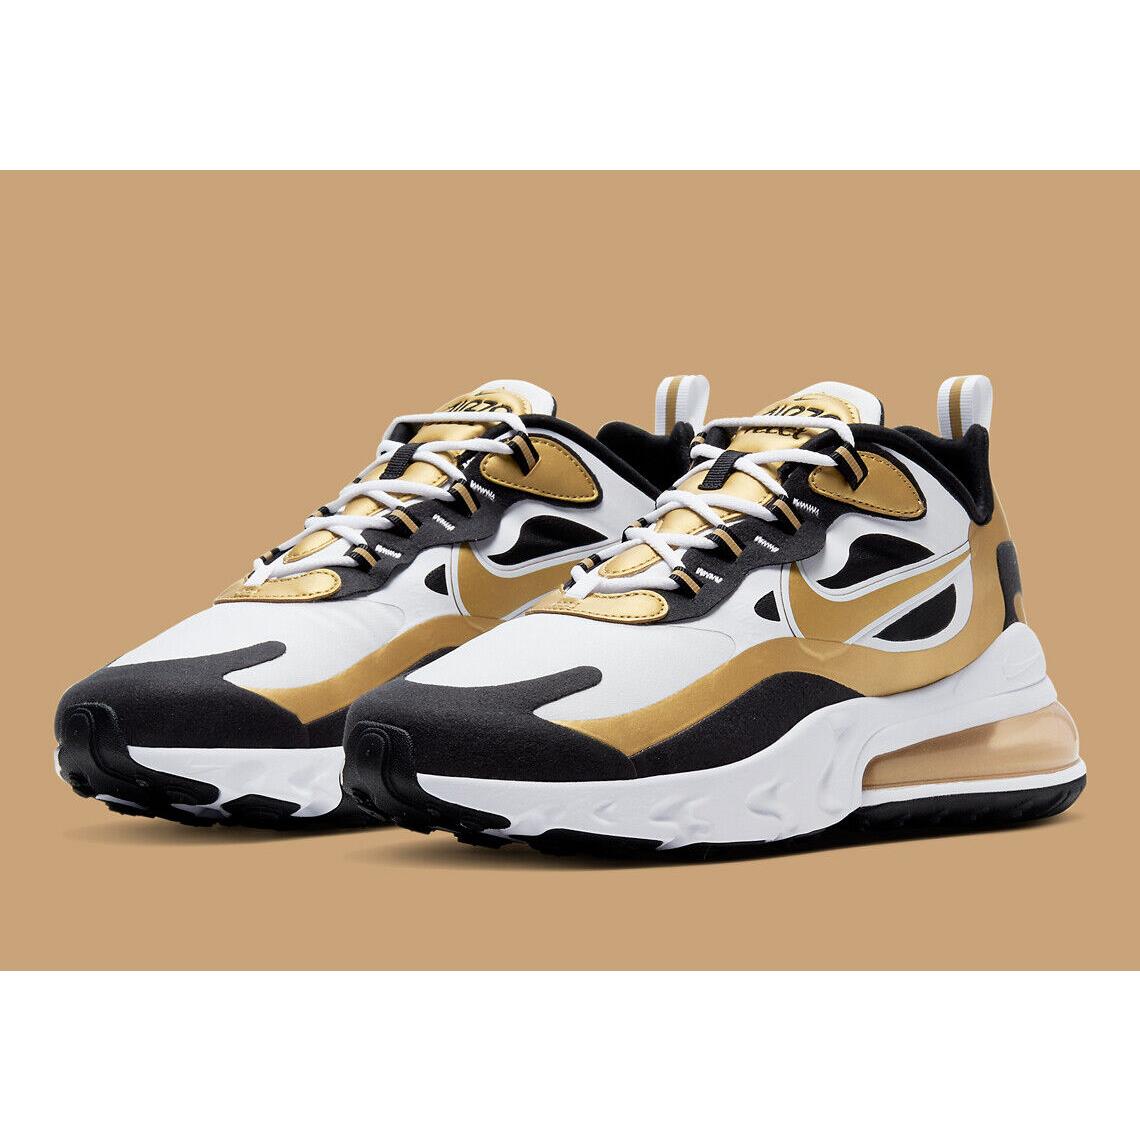 Men`s Nike Max 270 Running Shoes CW7298 100 Multi Sizes Wht/mgold/ blk | 883212468888 - Nike shoes Air Max React - White/Metallic Gold/Black White/Metallic Gold/Black Manufacturer | SporTipTop